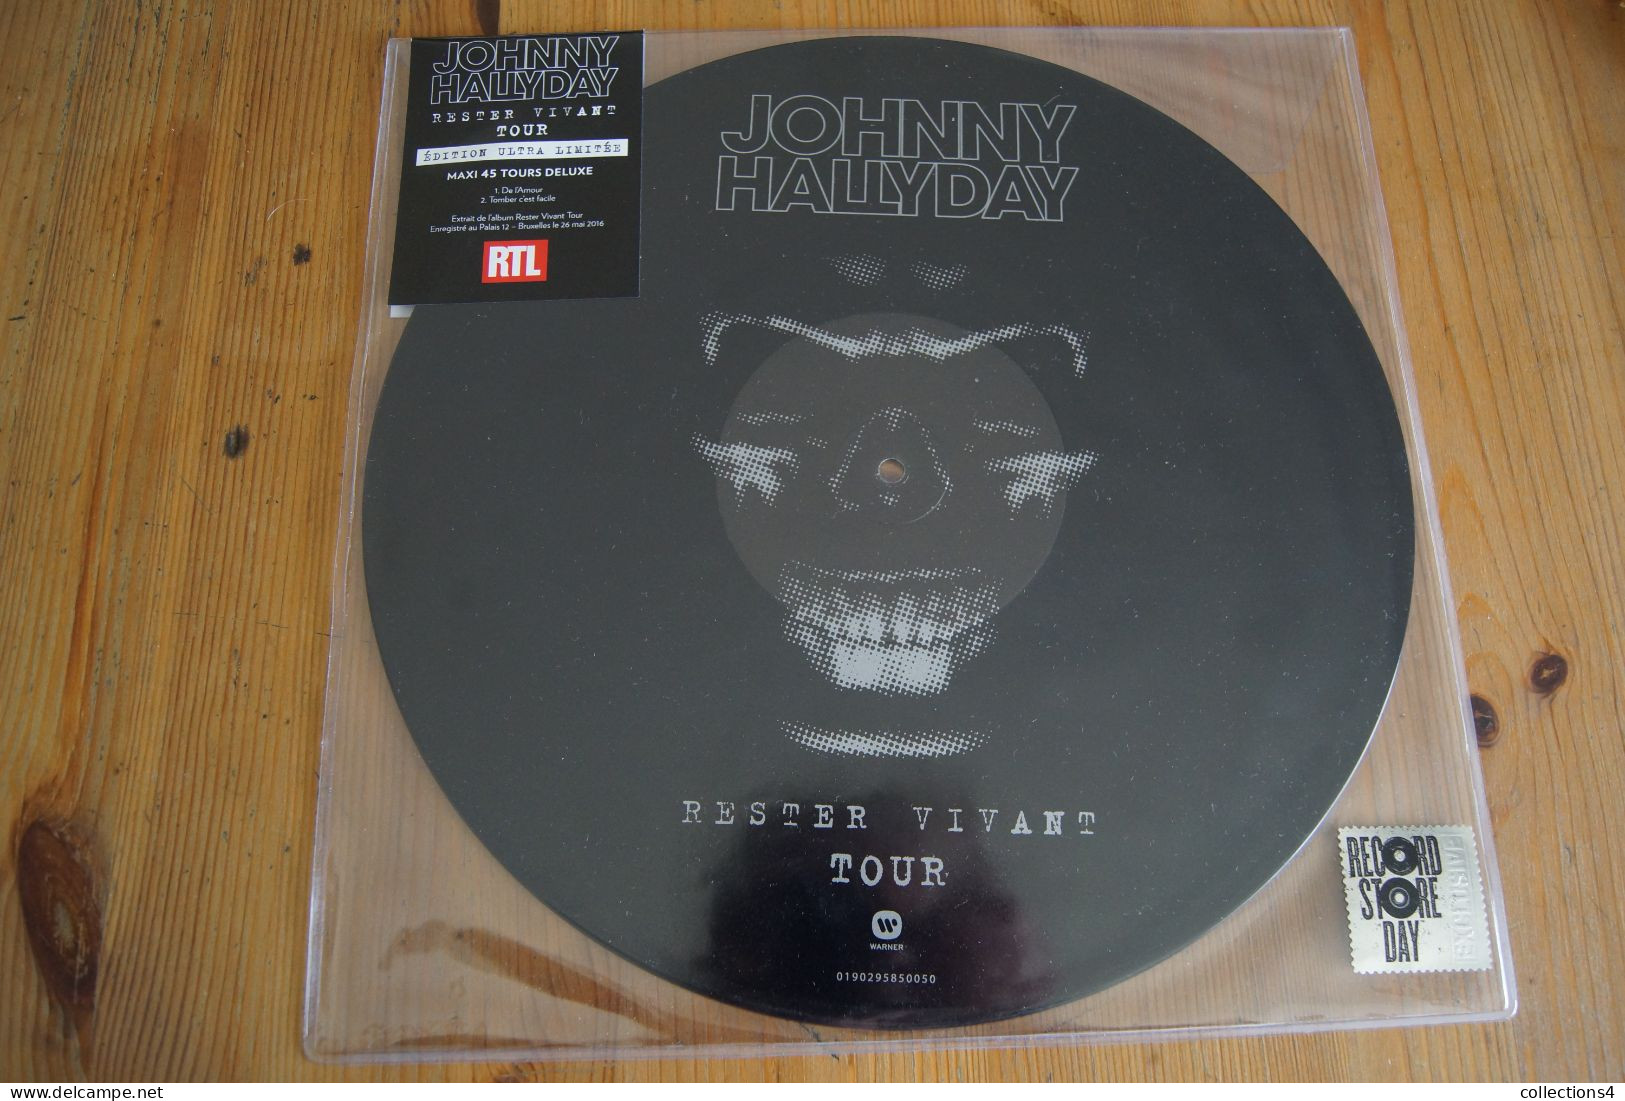 JOHNNY HALLYDAY RESTER VIVANT PICTURES DISC  EDITION ULTRA LIMITEE MAXI 45T  VALEUR+ NEUF SCELLE 2017 - 45 T - Maxi-Single